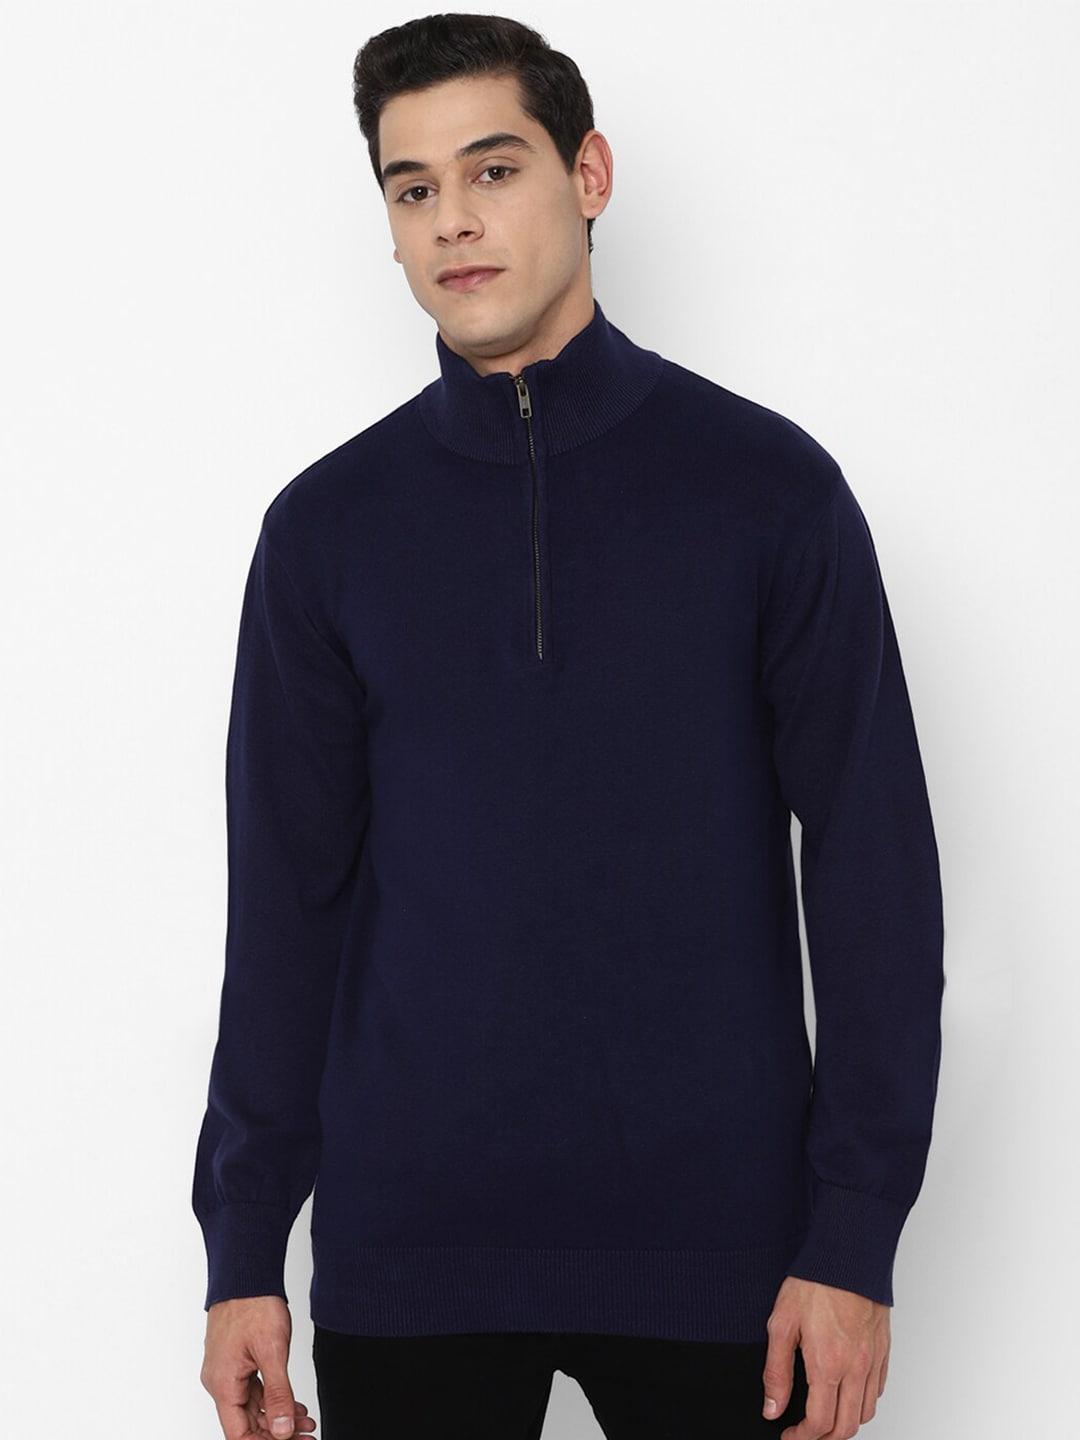 forever-21-men-navy-blue-pullover-with-zip-detail